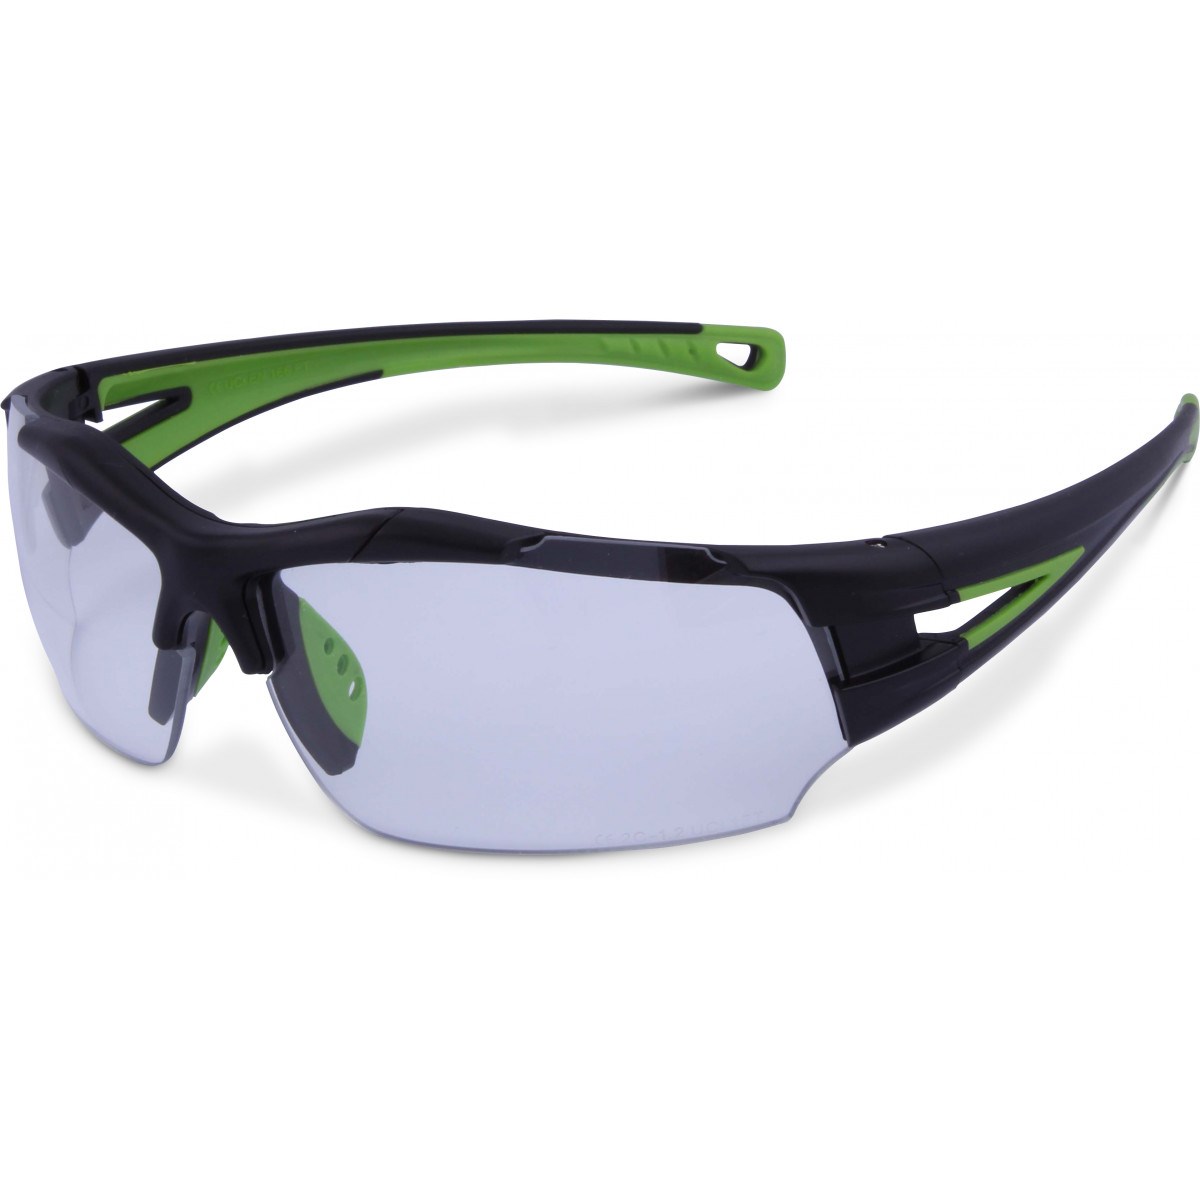 Safety Glasses - Anti Fog / Scratch Clear Lens